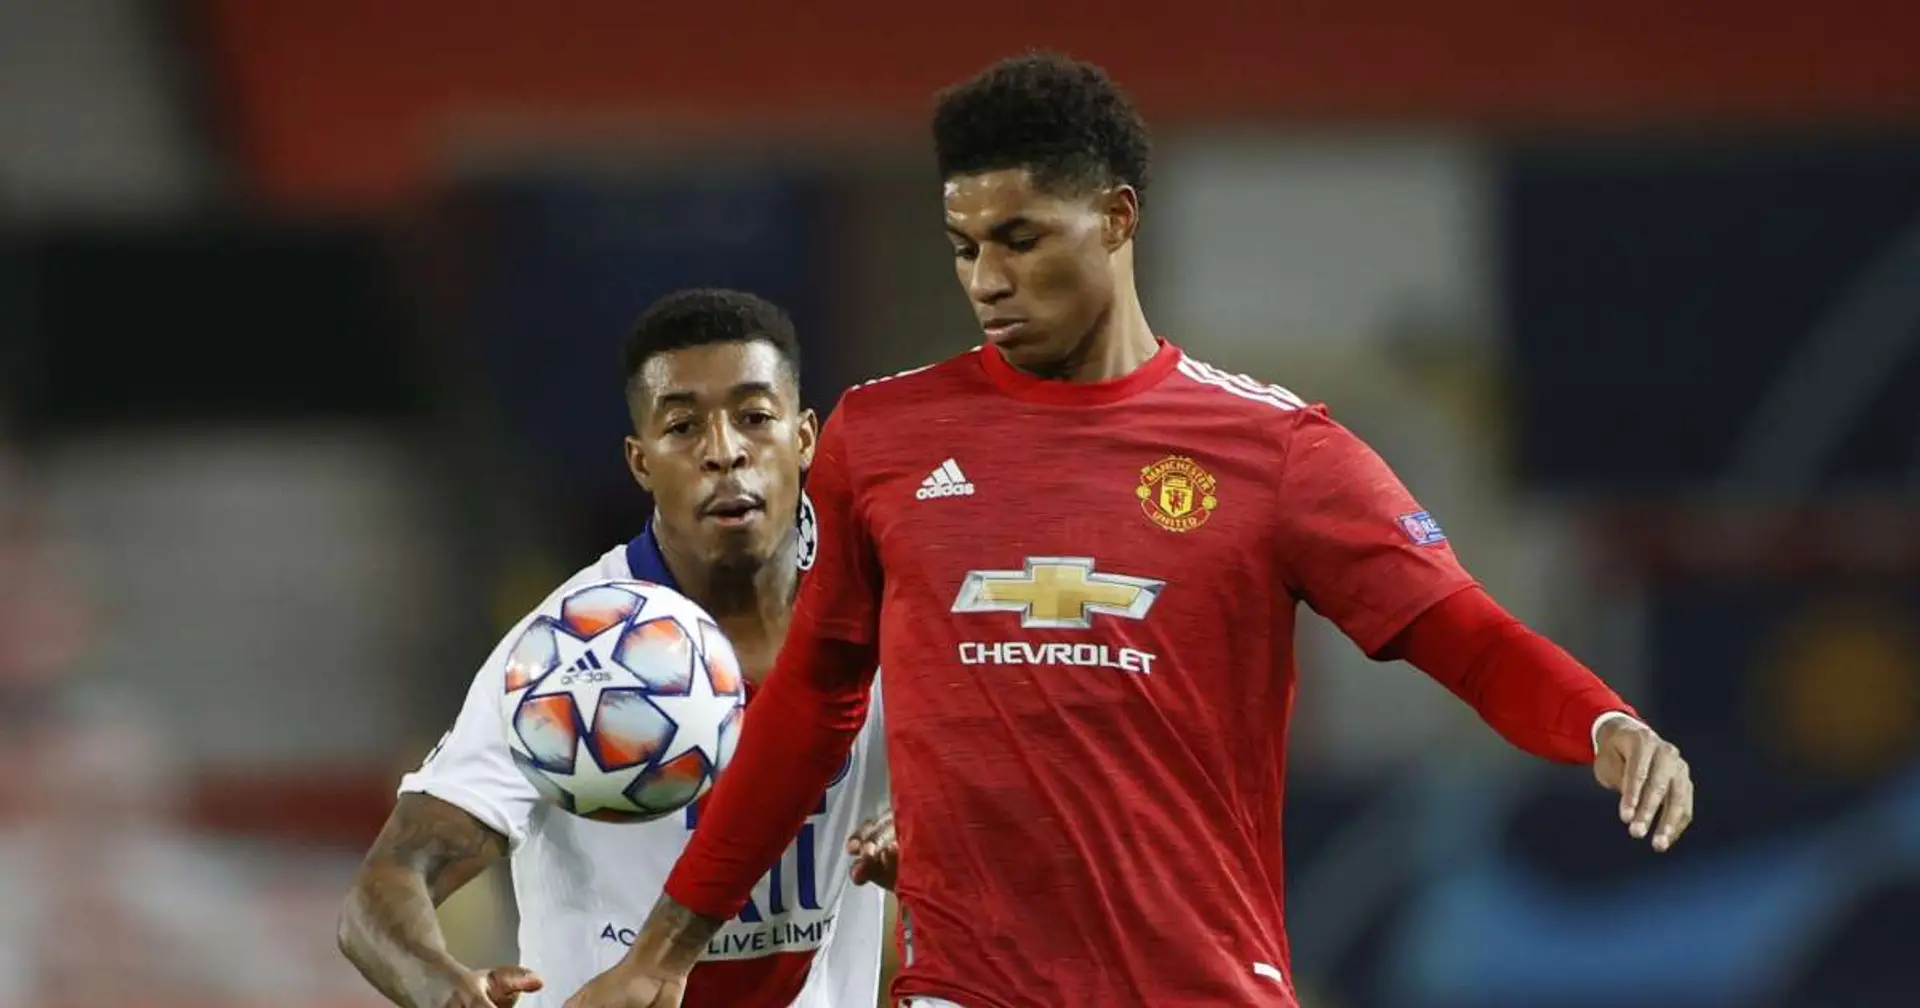 Marcus Rashford and 2 more Man United players make list of 10 most valued Premier League players